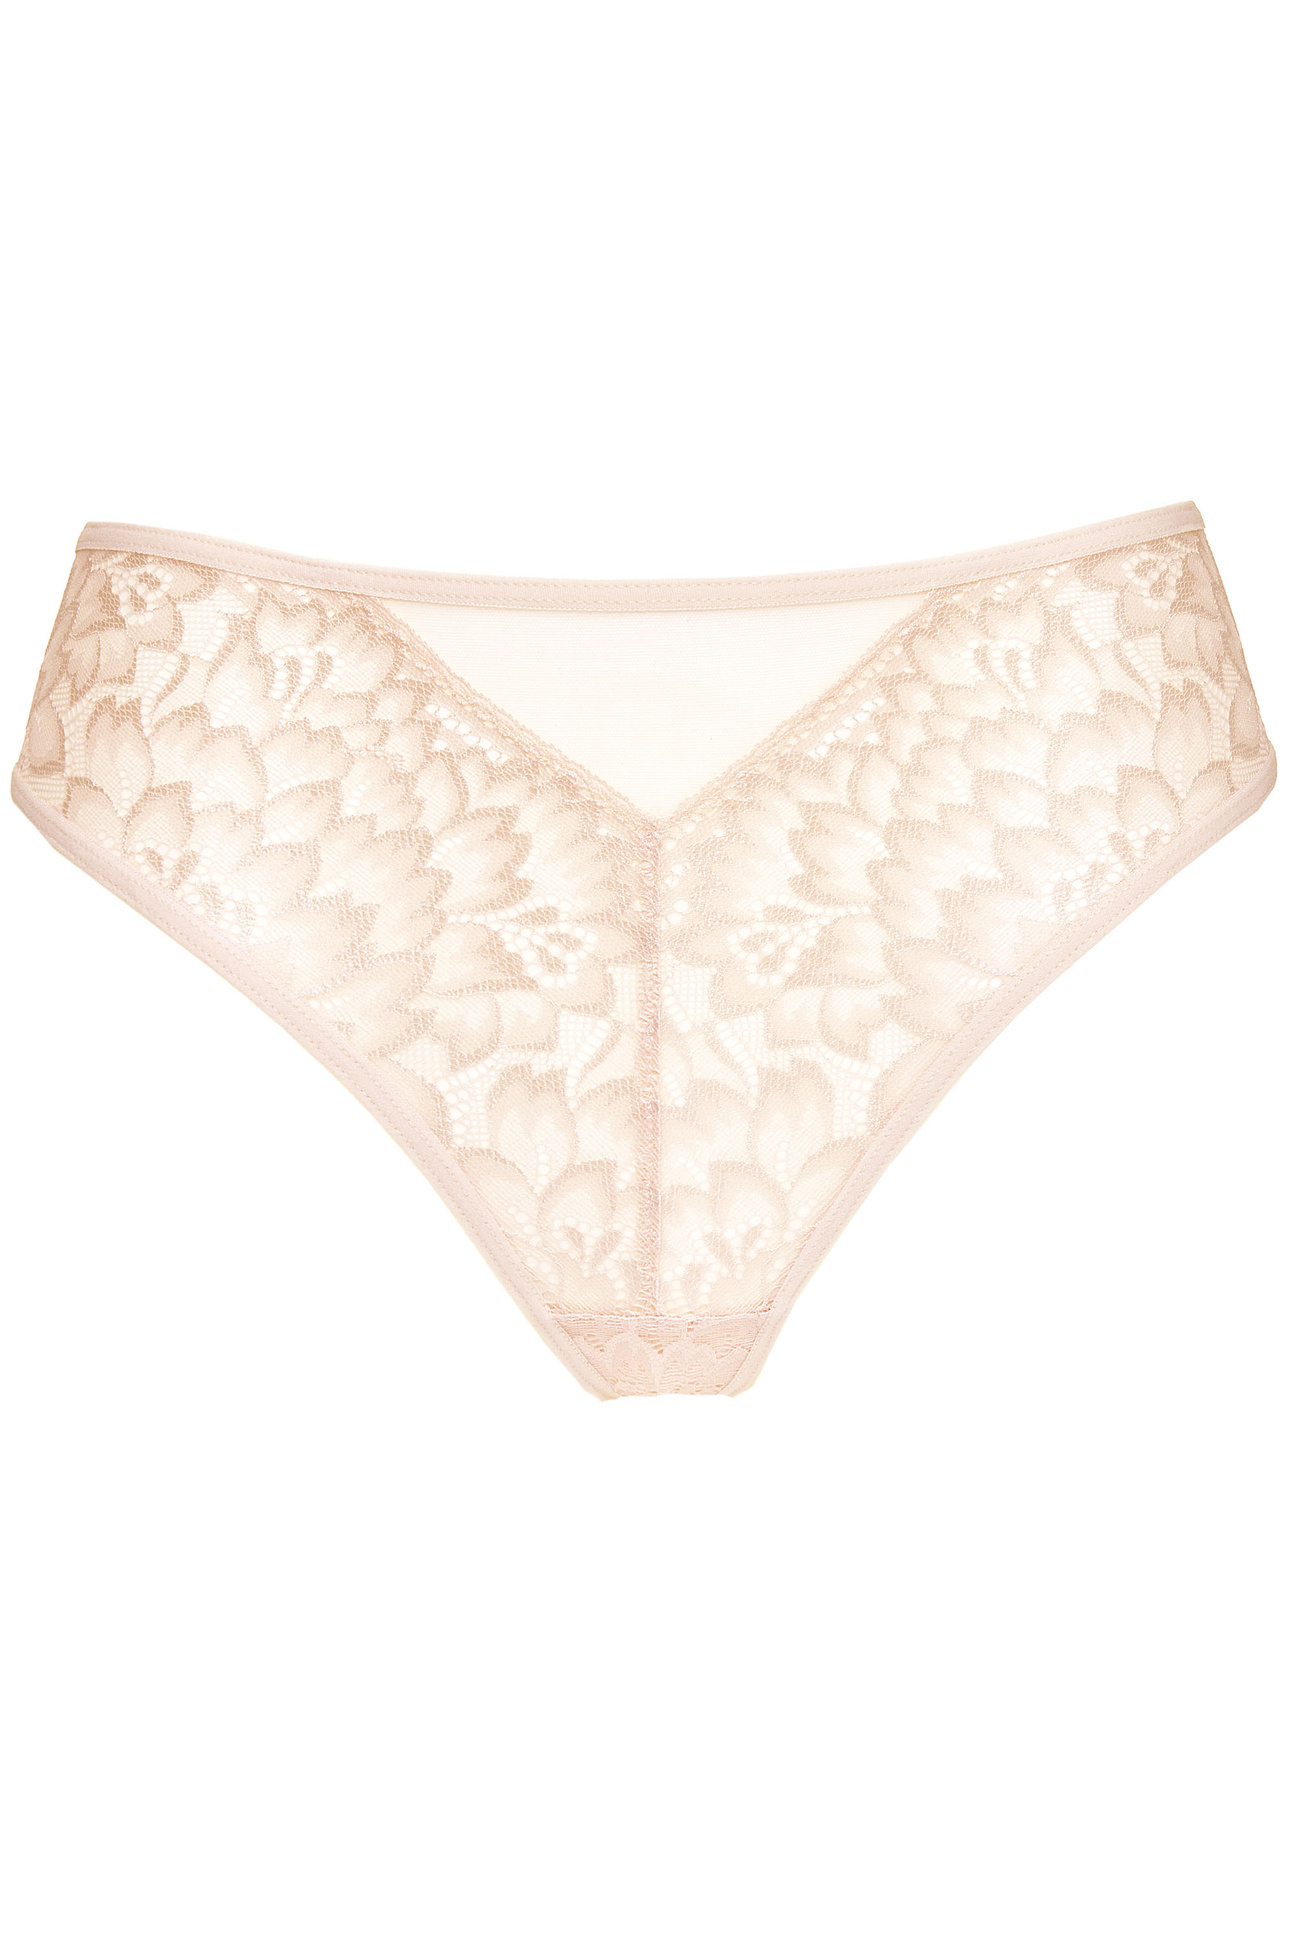 Chelsea floral lace thong beige